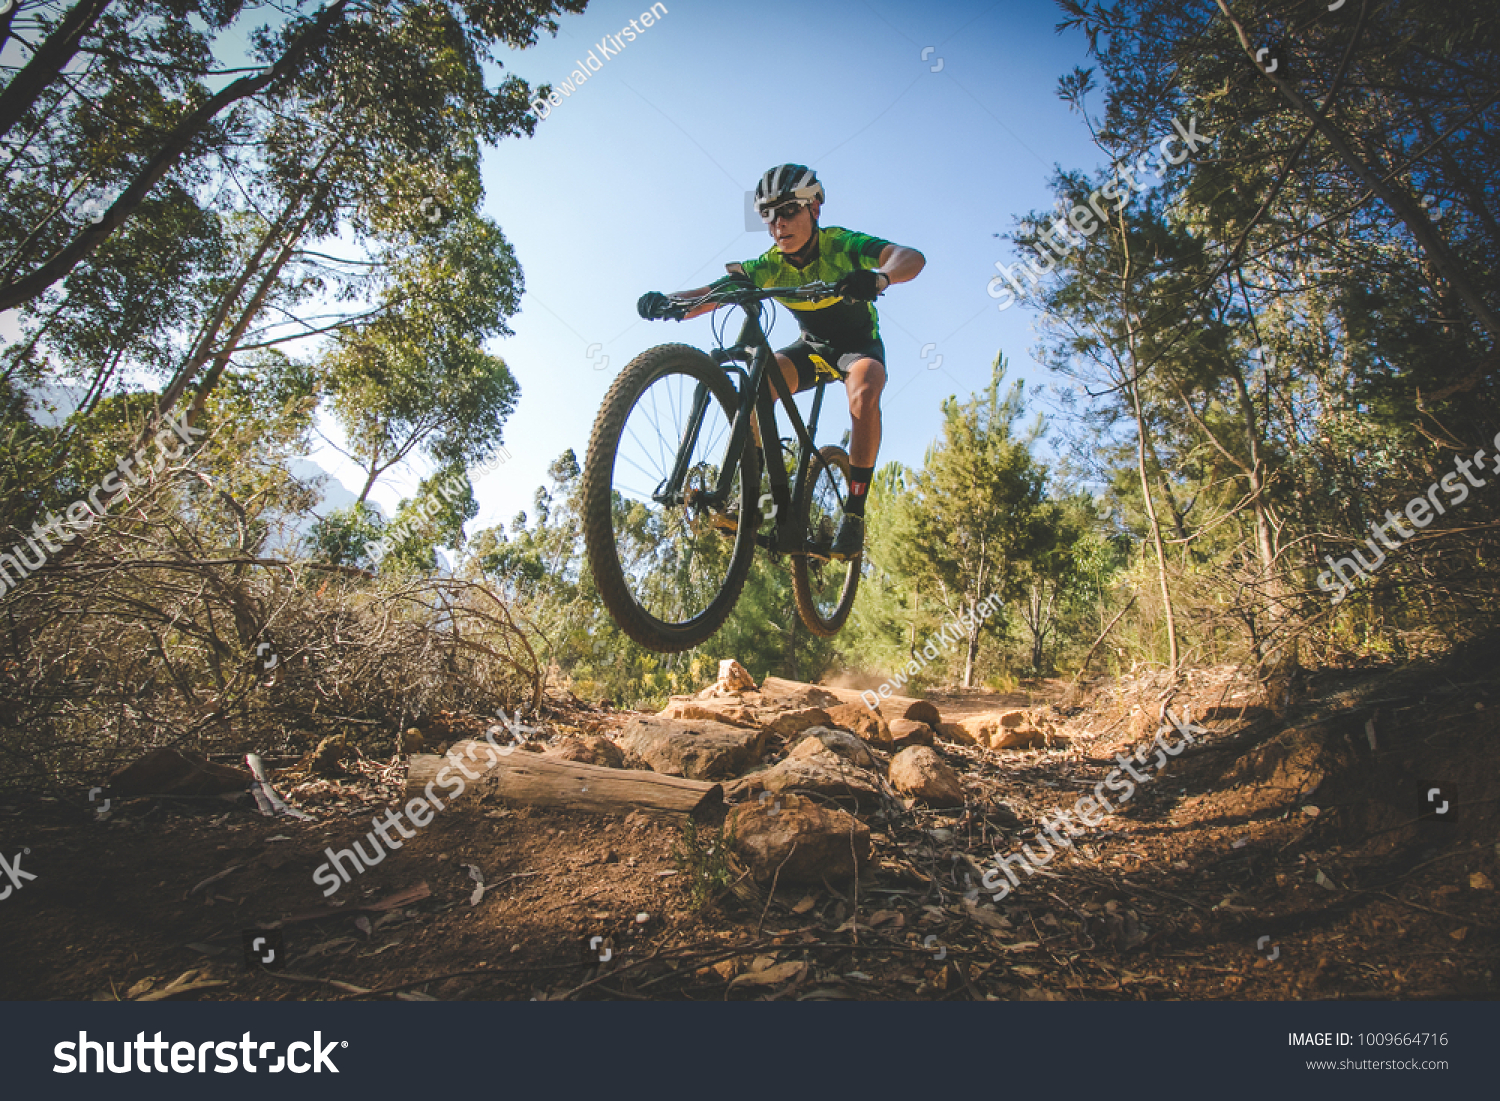 Wide angle view of a mountain biker speeding downhill on a mountain bike track in the woods #1009664716